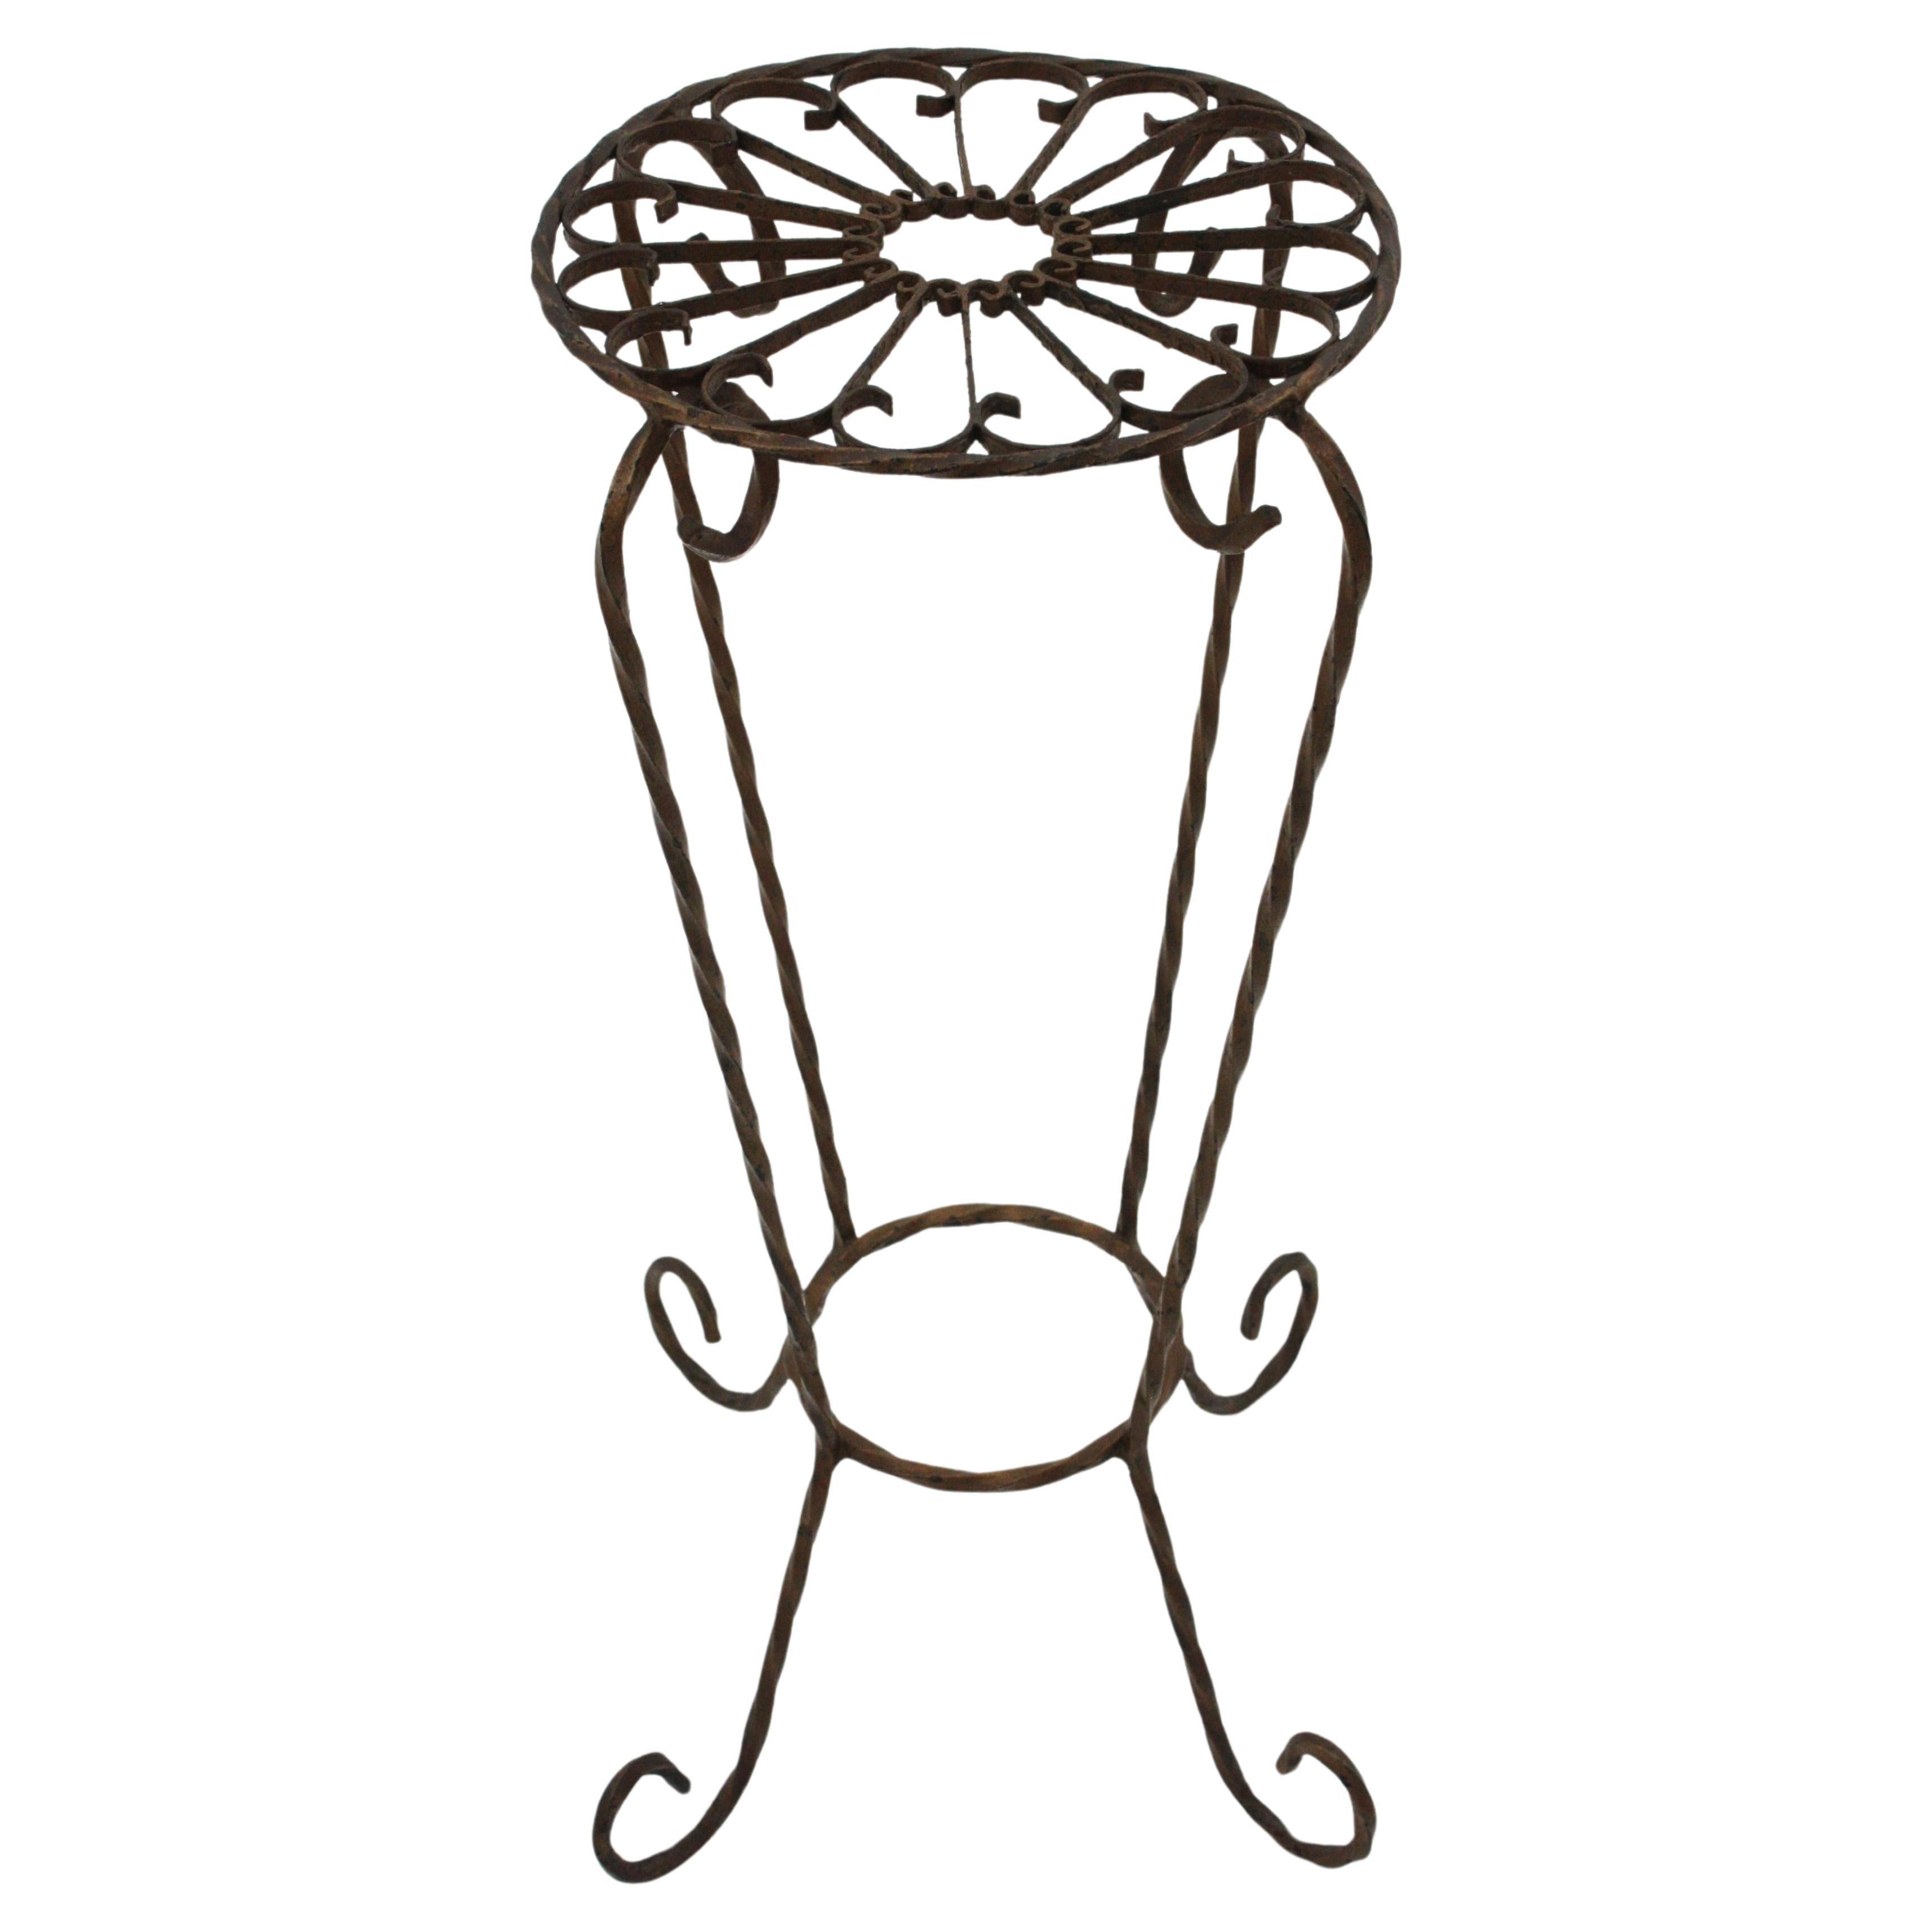 Spanish Scrollwork Wrought Iron Side Table / Drinks Table, 1950s